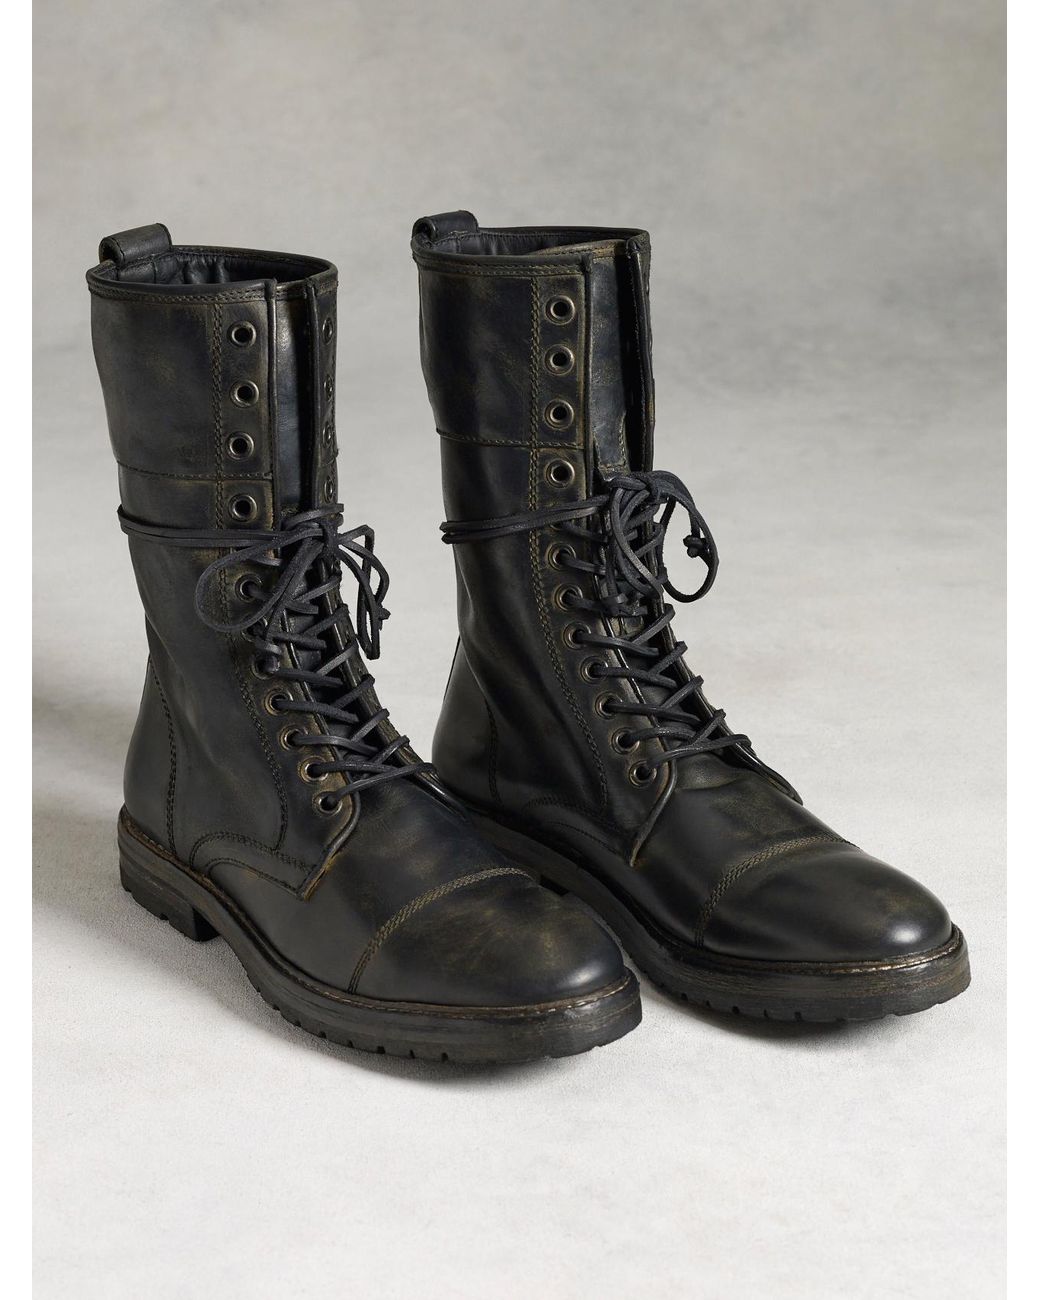 Stanley Boots for Men for Sale, Shop New & Used Men's Boots